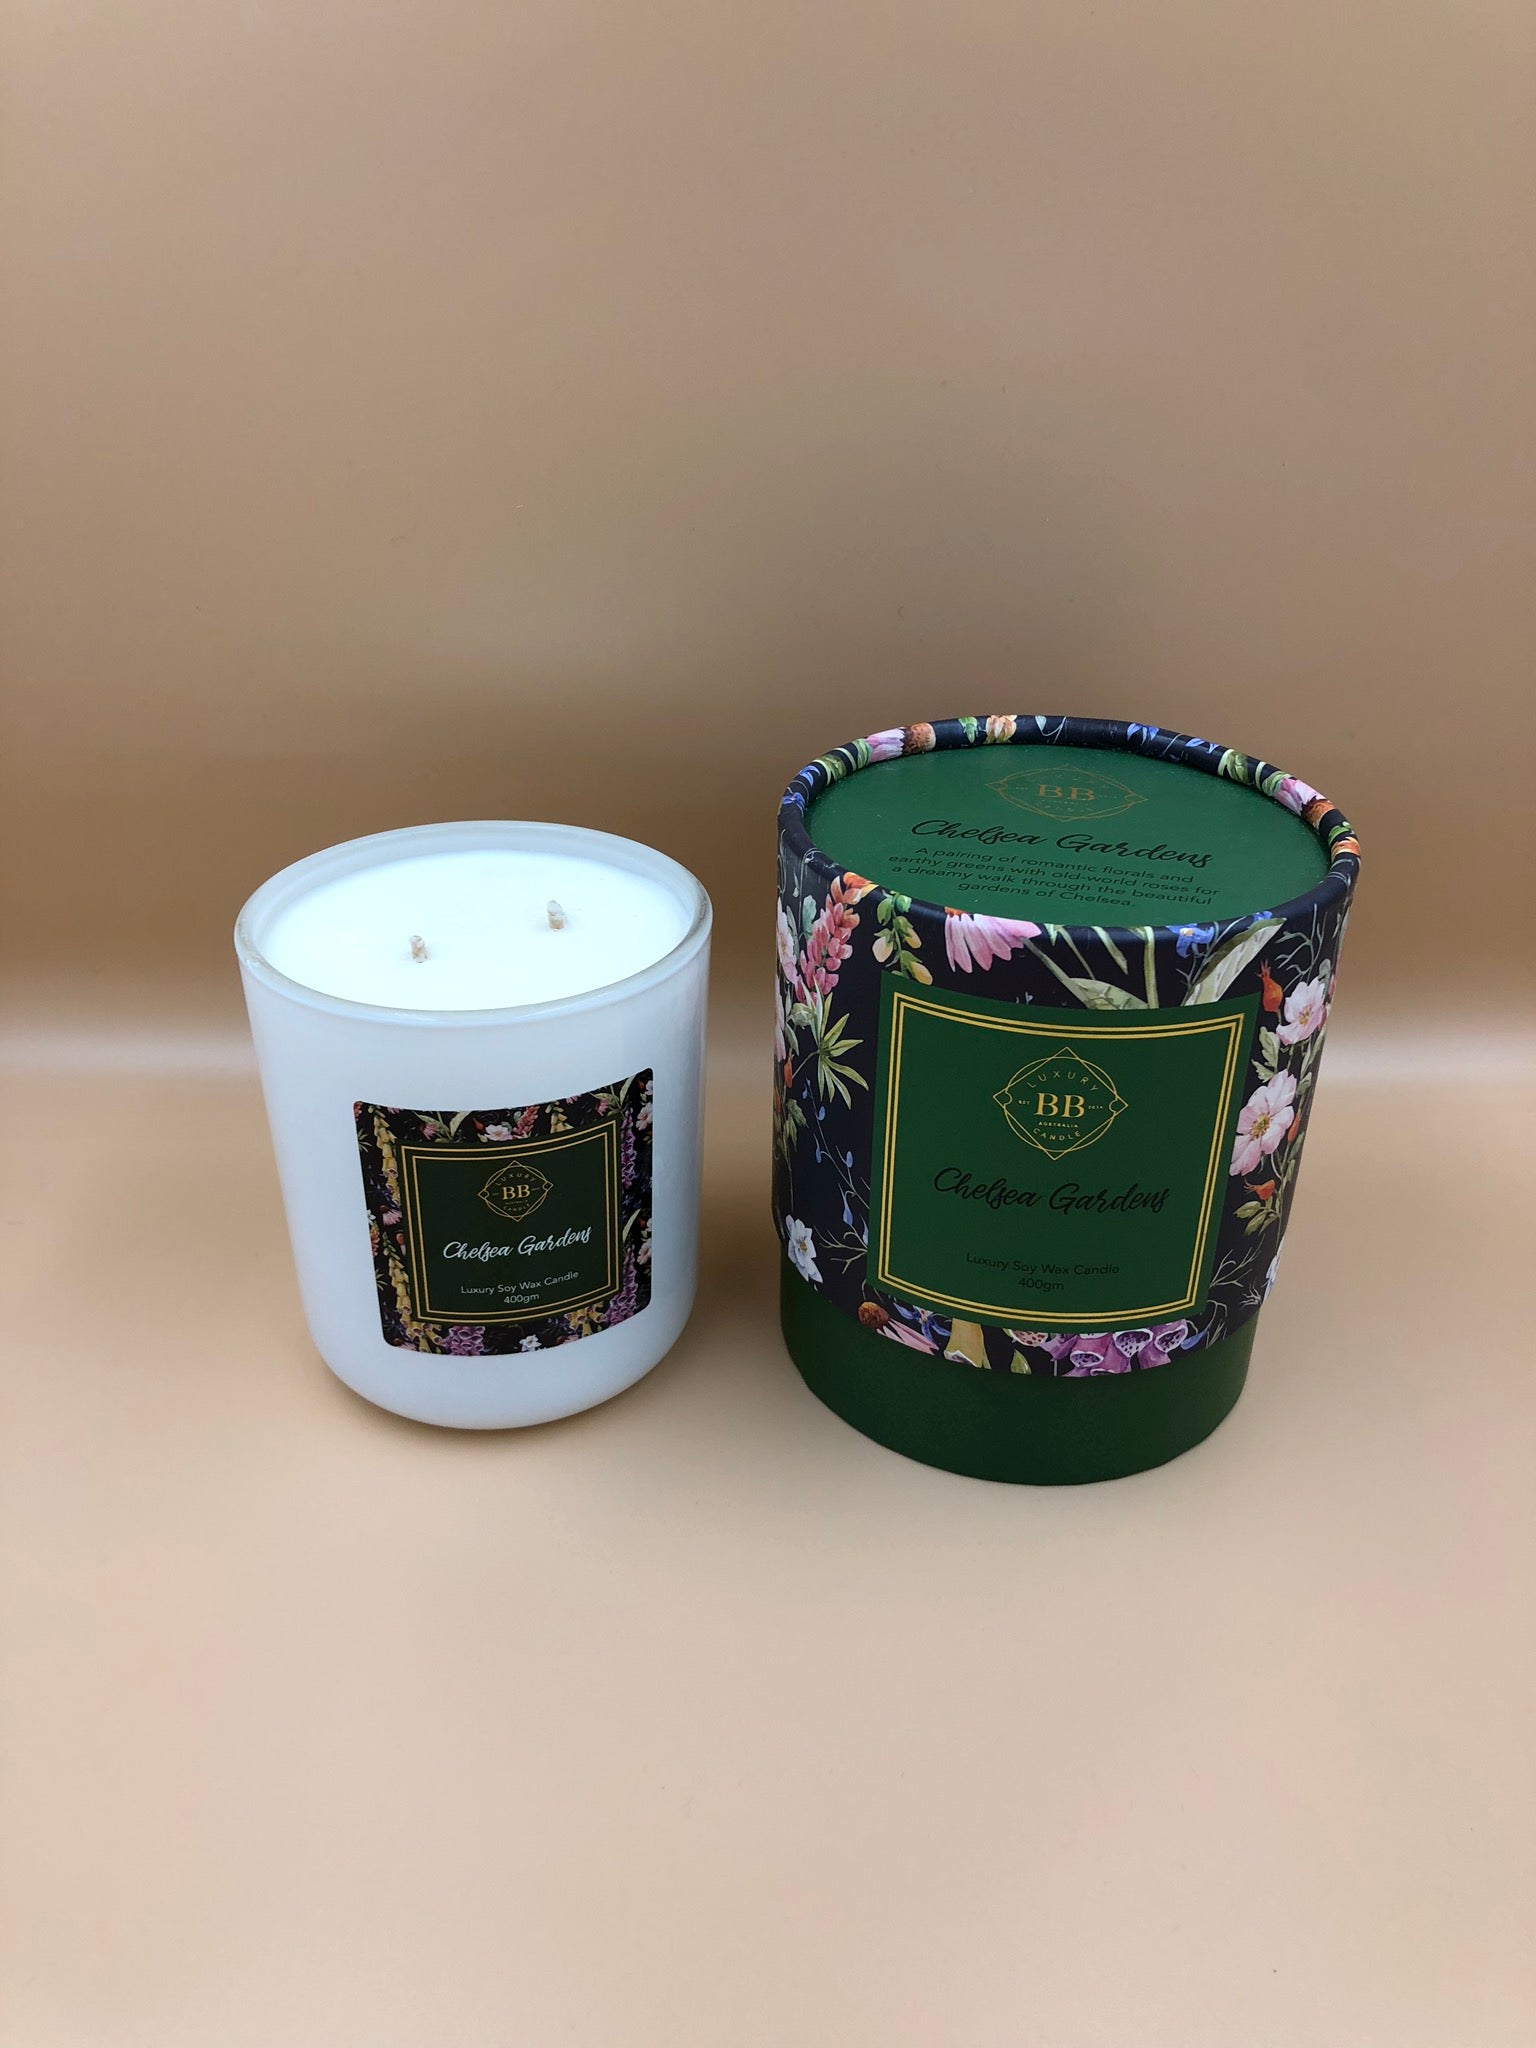 Chelsea Gardens 400g Soy Candle | Success Gifts | Online Store & Mountain Gate VIC